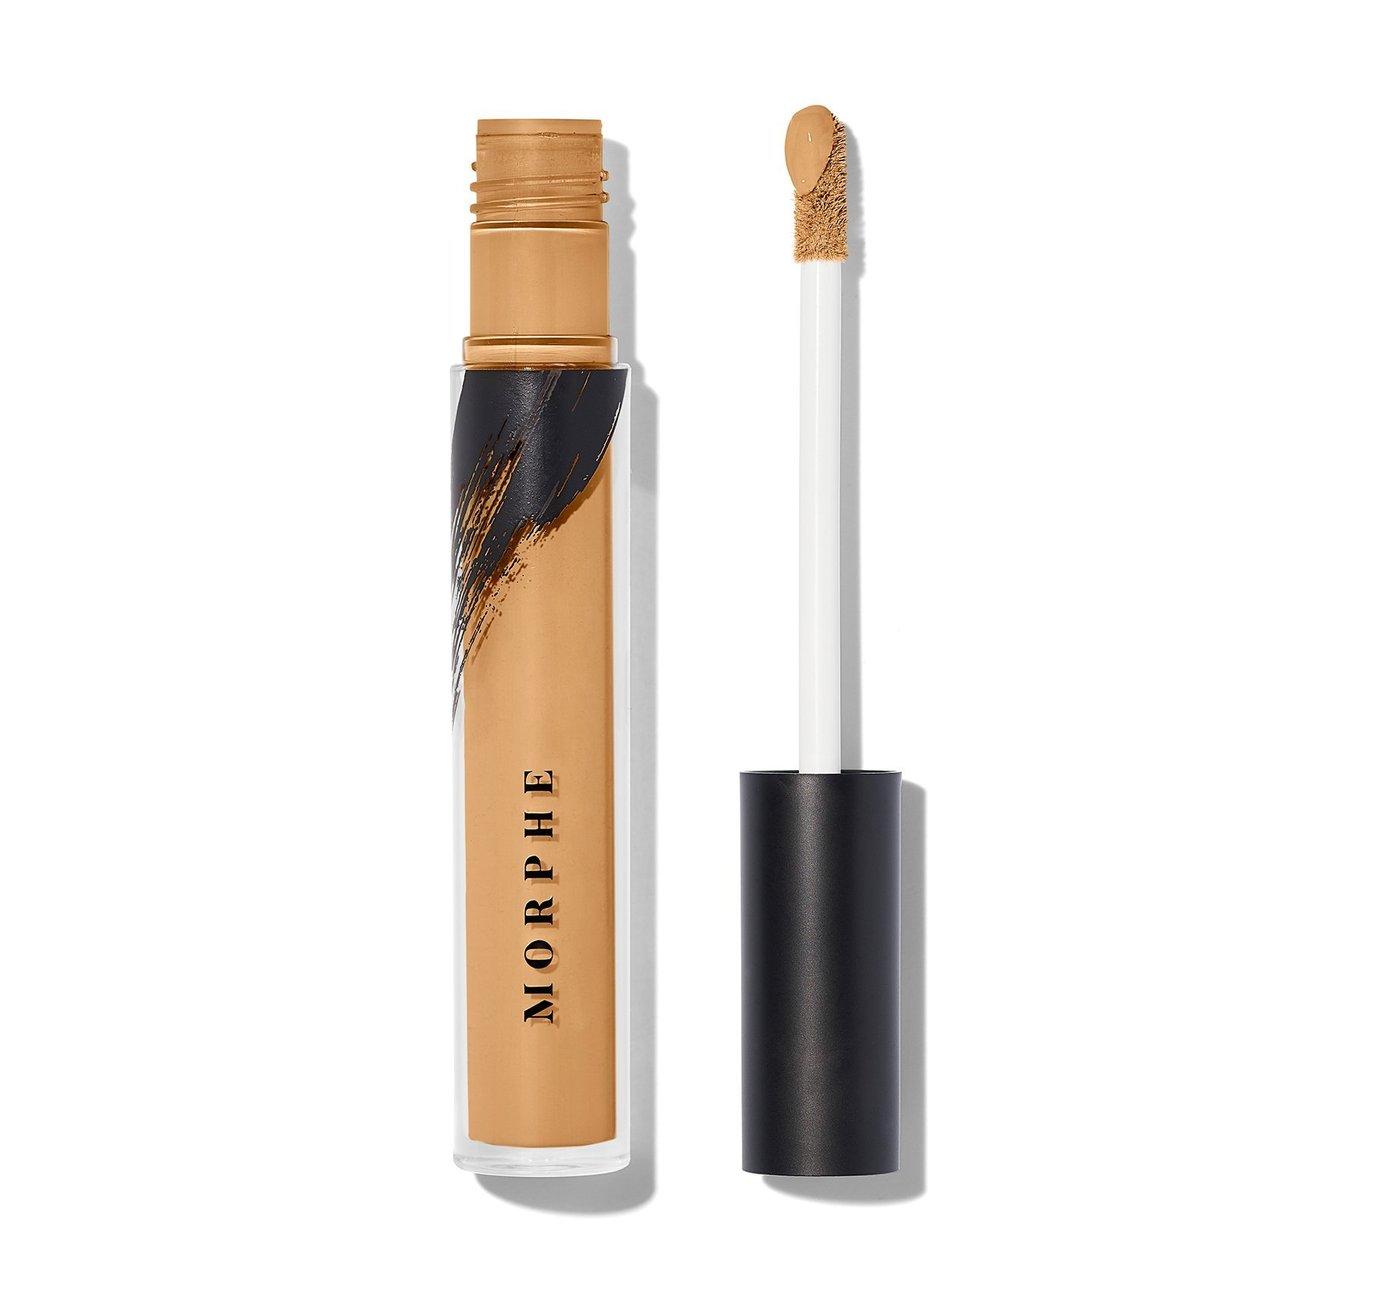 Morphe Fluidity Full-Coverage Concealer C2.25